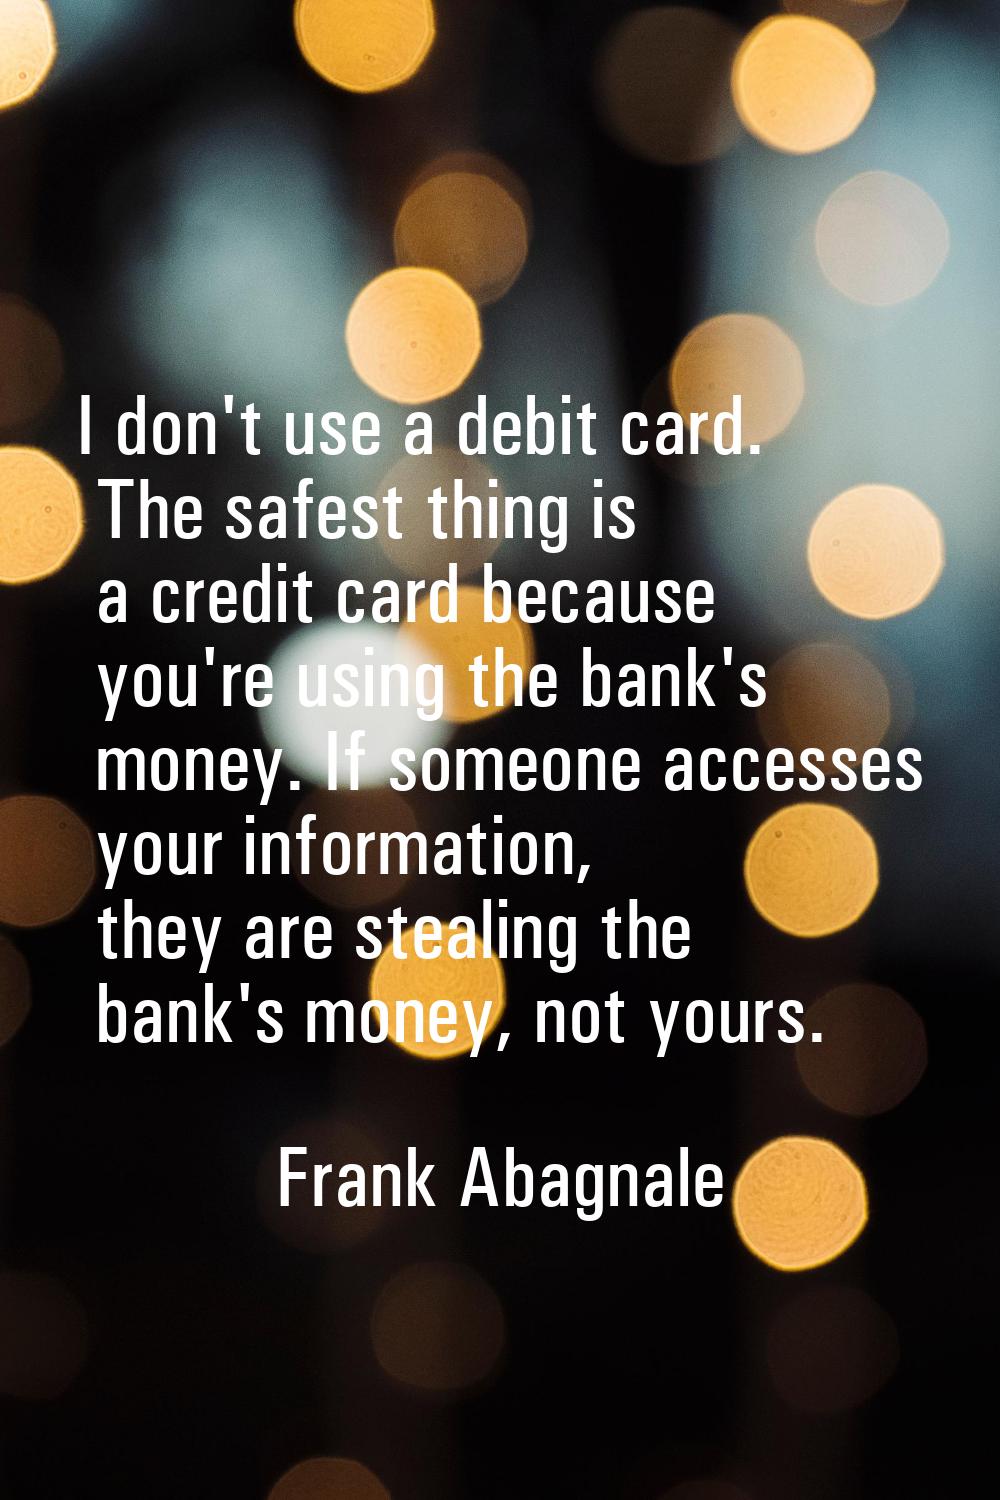 I don't use a debit card. The safest thing is a credit card because you're using the bank's money. 